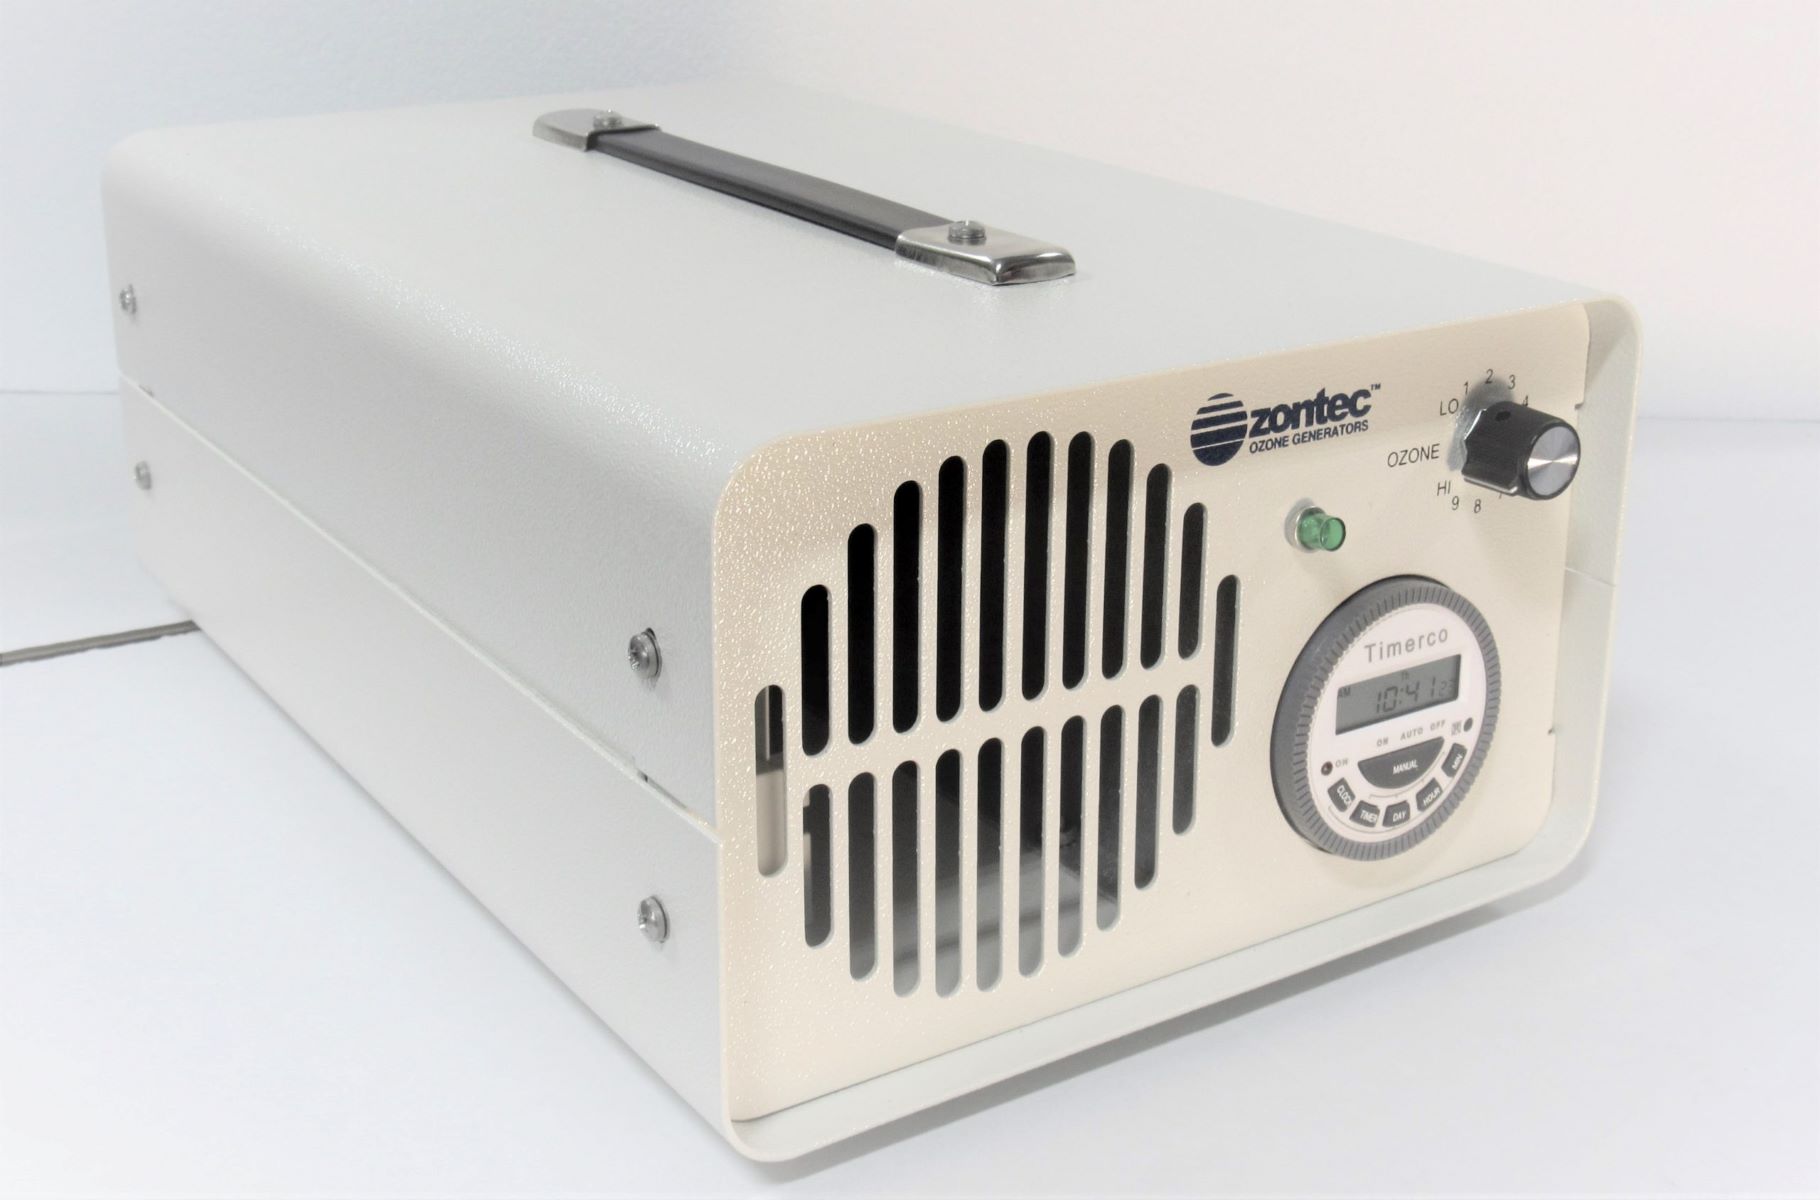 Say Goodbye To Gasoline Smell With An Ozone Generator!